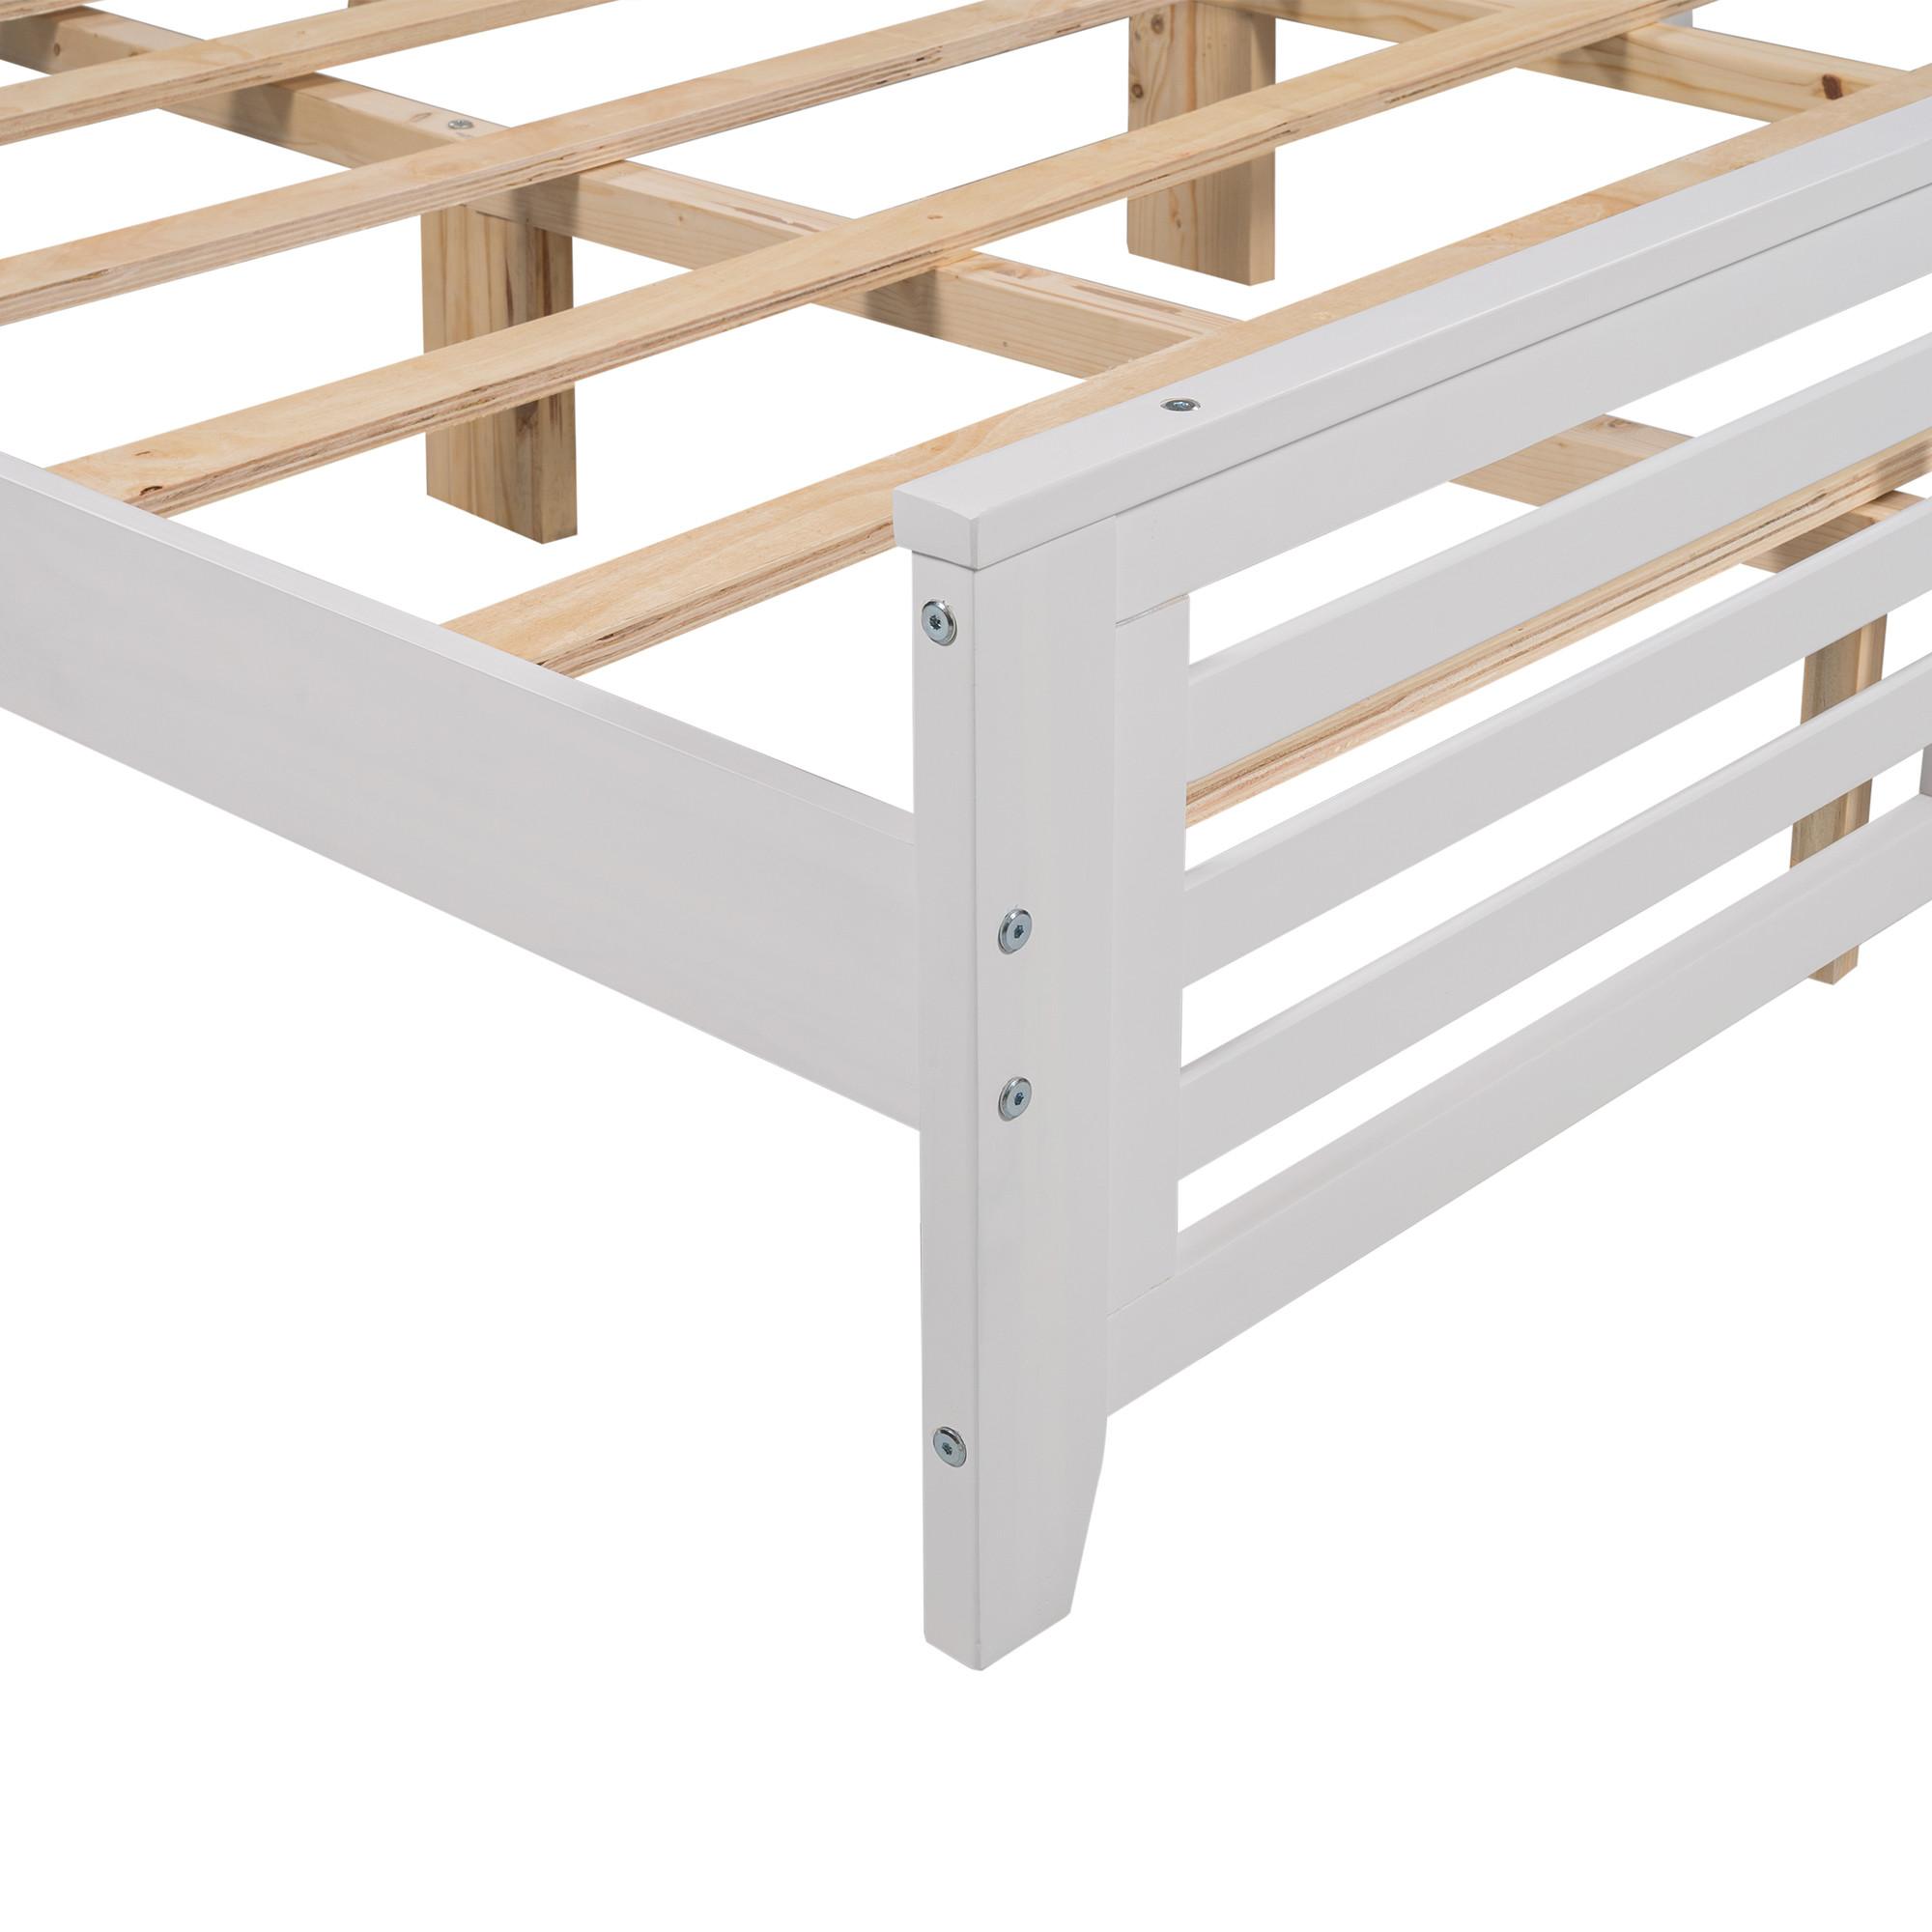 King Size Wood Platform Bed Frame with Headboard and Footboard, Solid Wood Foundation with Slat Support, White 79.9x80.7x41.3inch - image 5 of 7